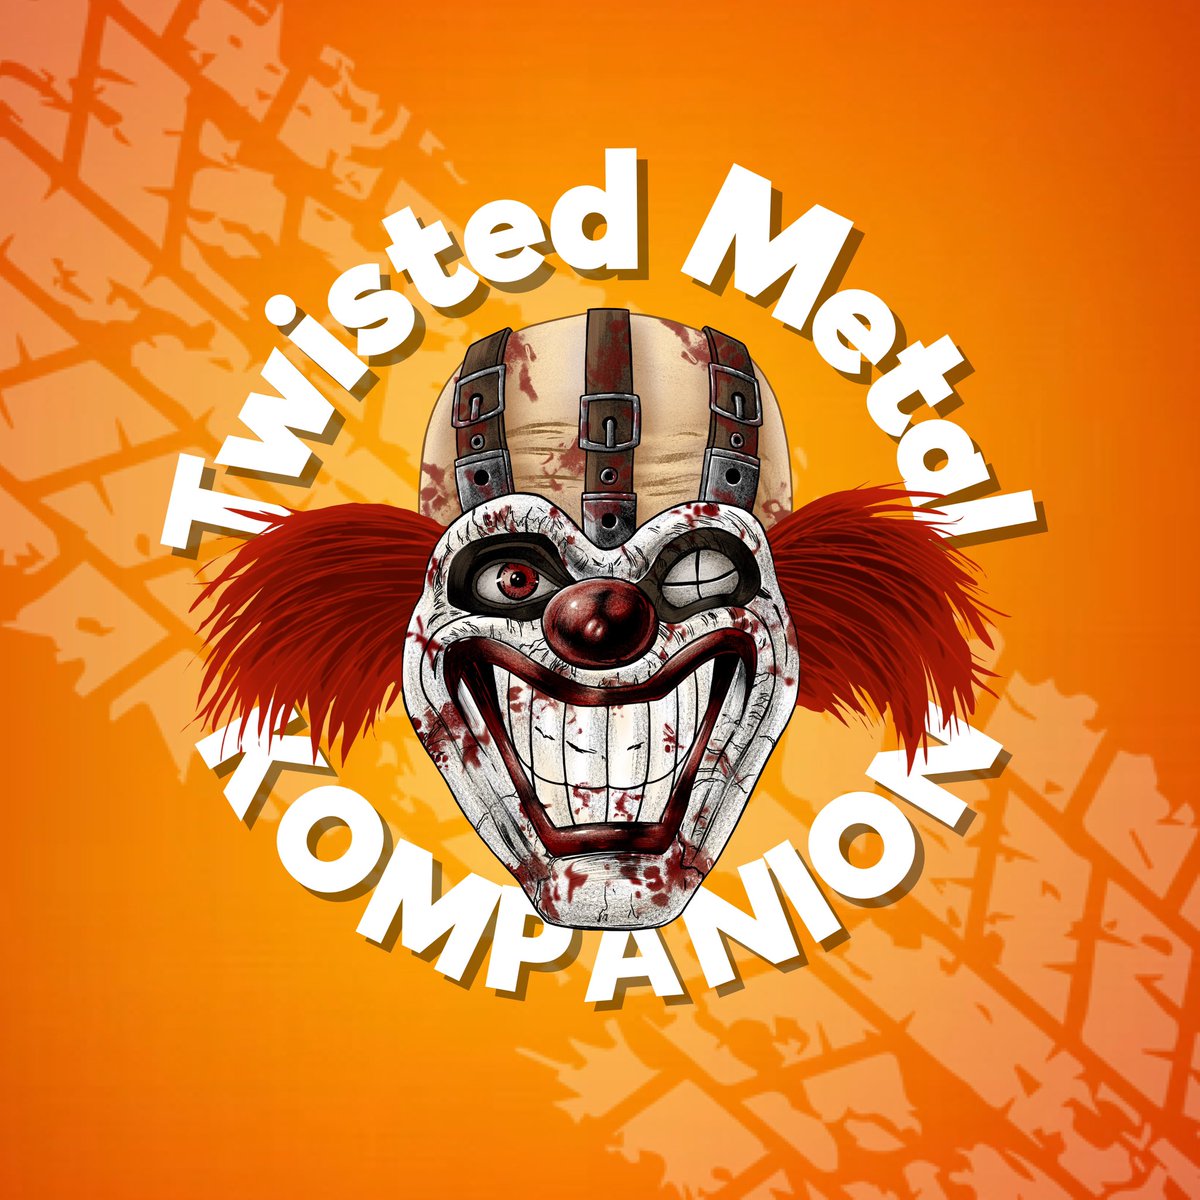 Here’s our new and official cover art for our upcoming coverage of #TwistedMetal! Podcast and YouTube channel coming soon so #BuckleUp! 

Sweet Tooth drawn by: @ReisArt